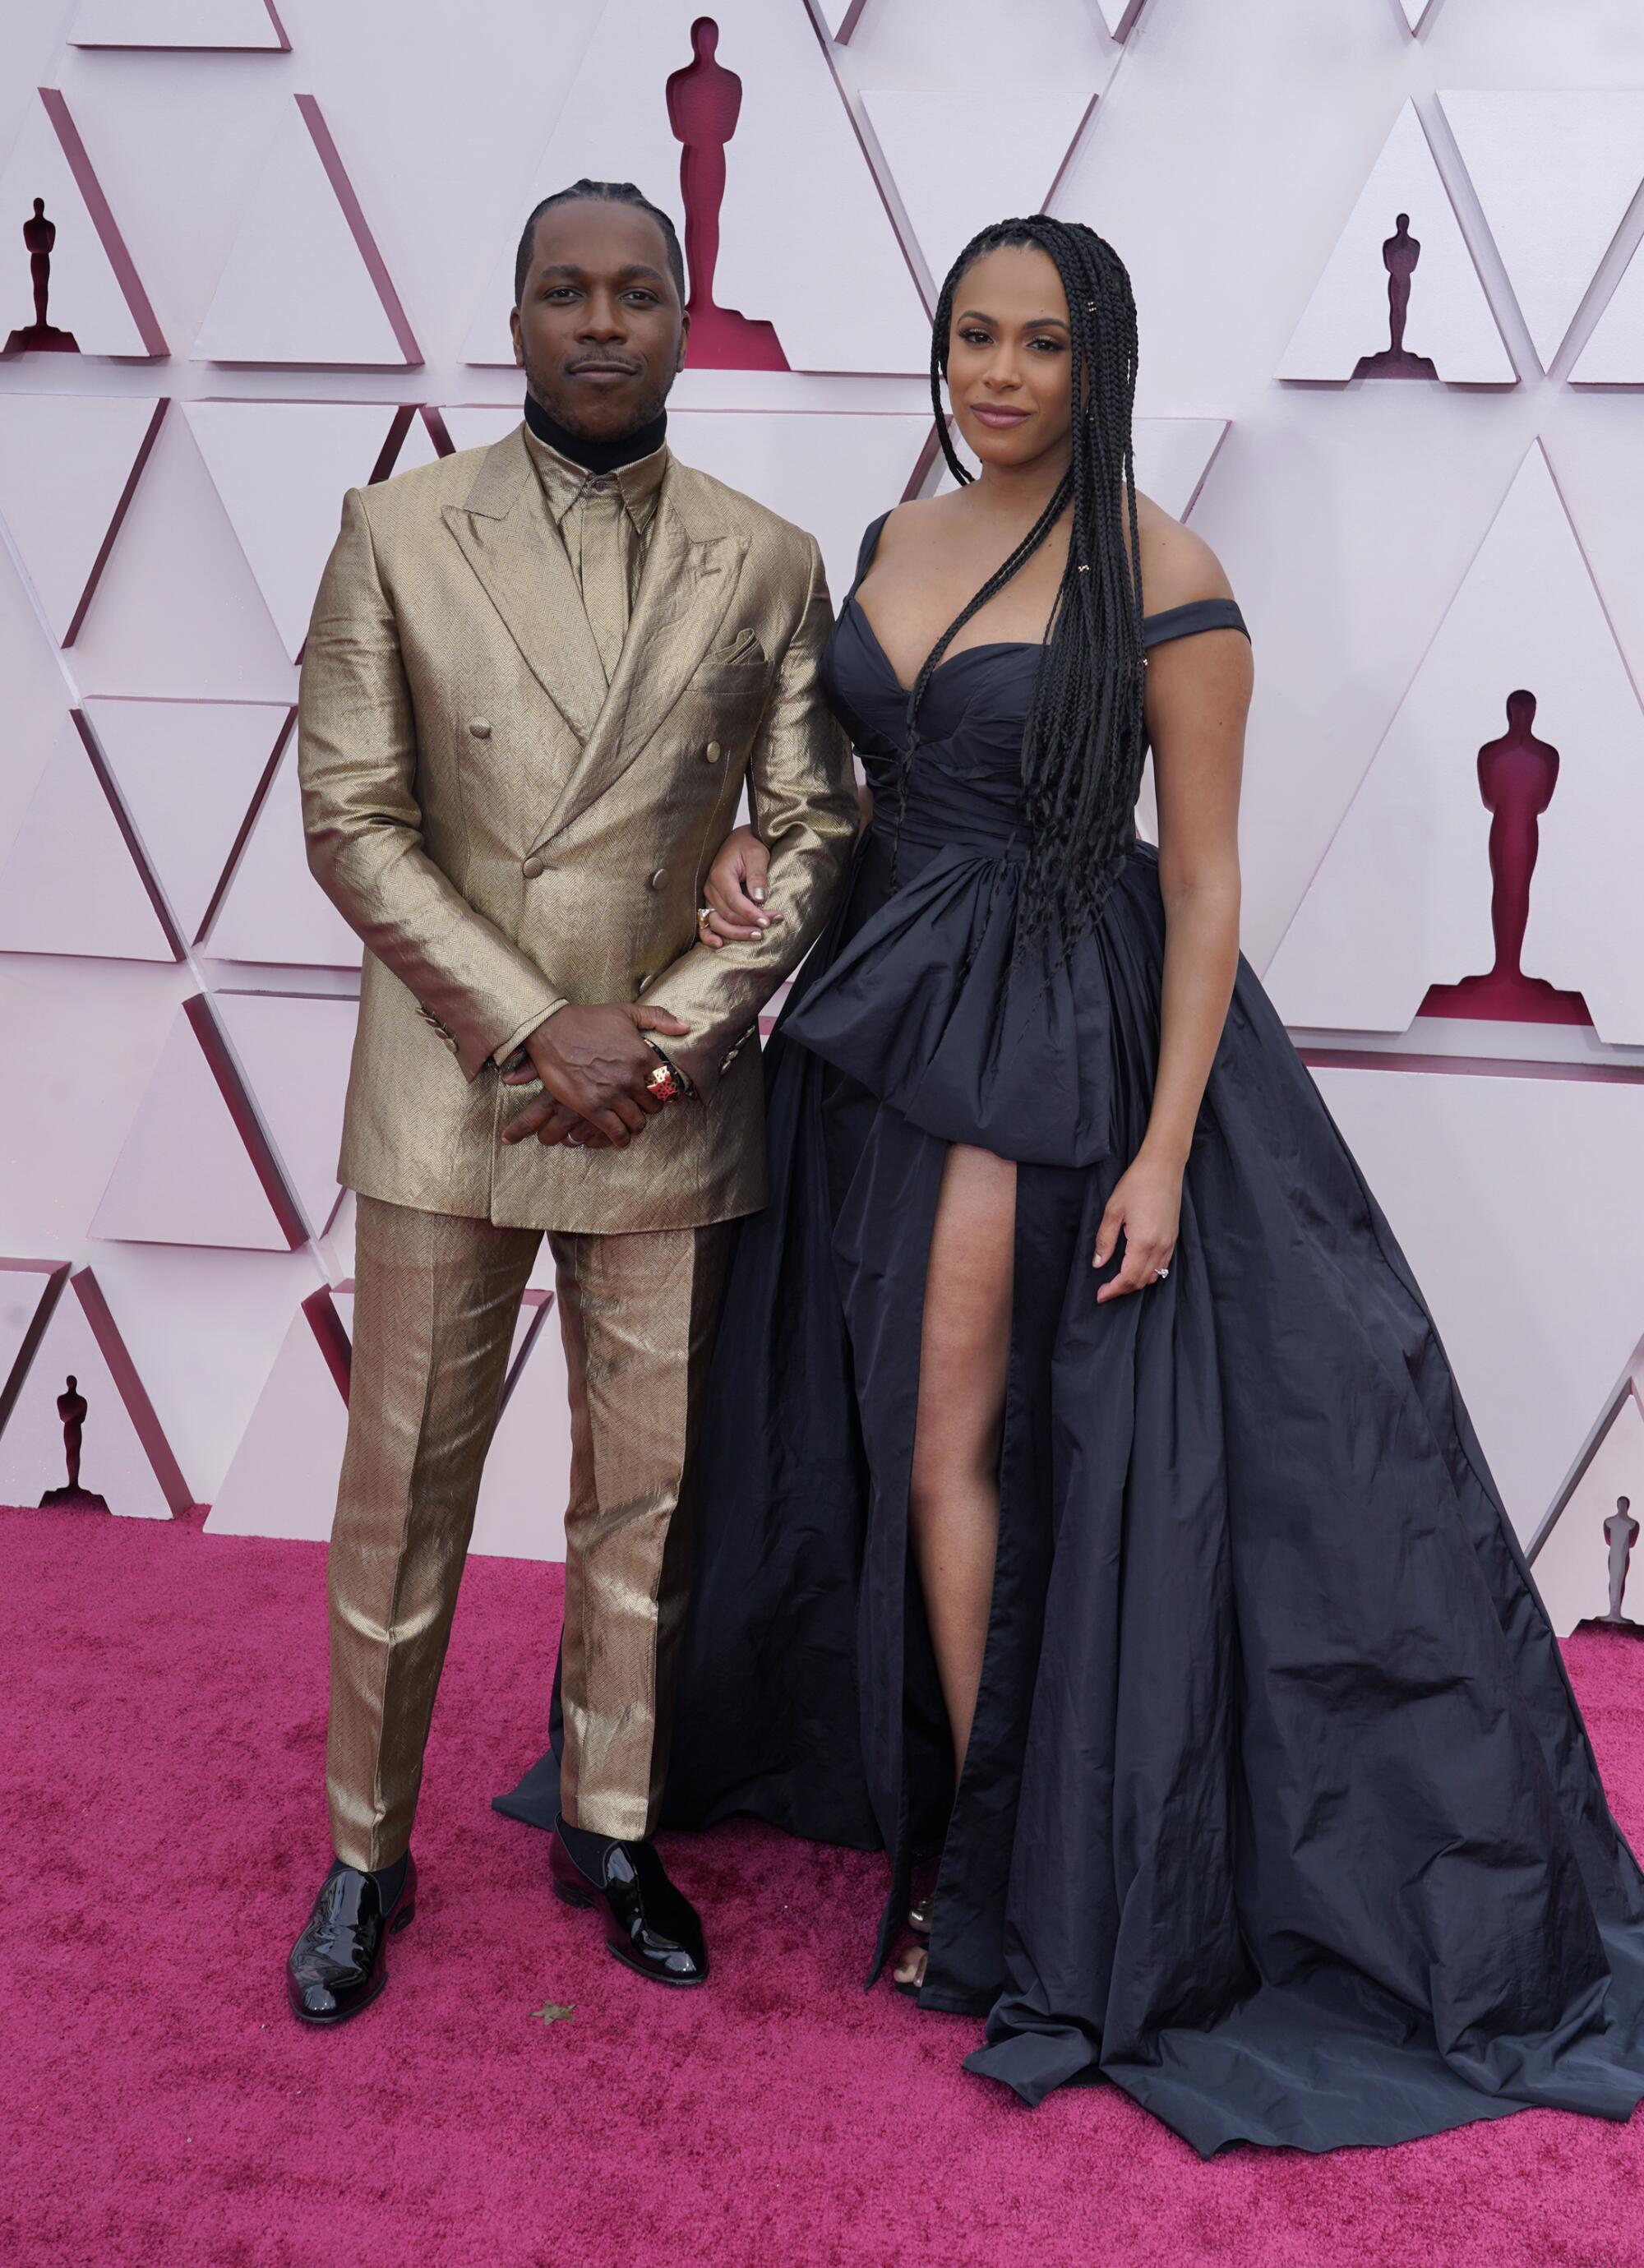 Leslie Odom Jr. in a gold suit and Nicolette Robinson in a dark low-cut dress with one leg showing. 